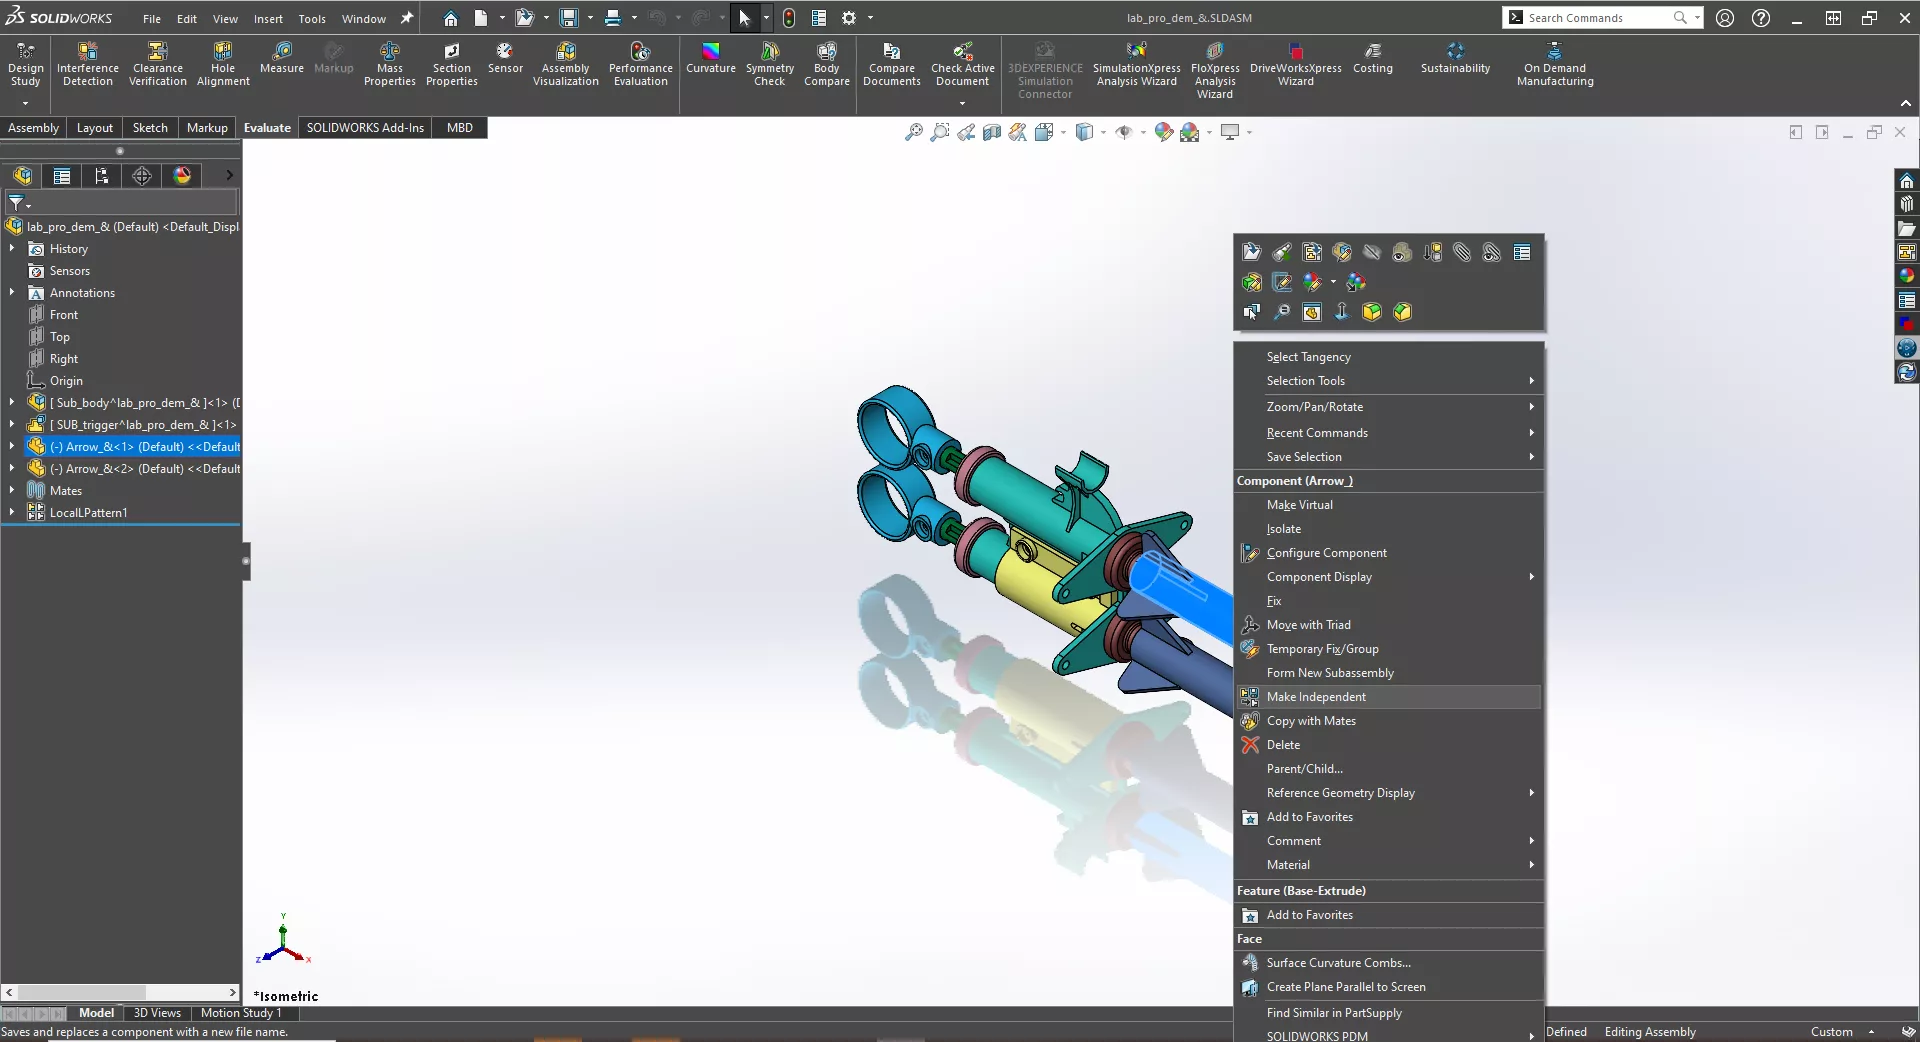 Make independent under the right-click menu in SOLIDWORKS assemblies